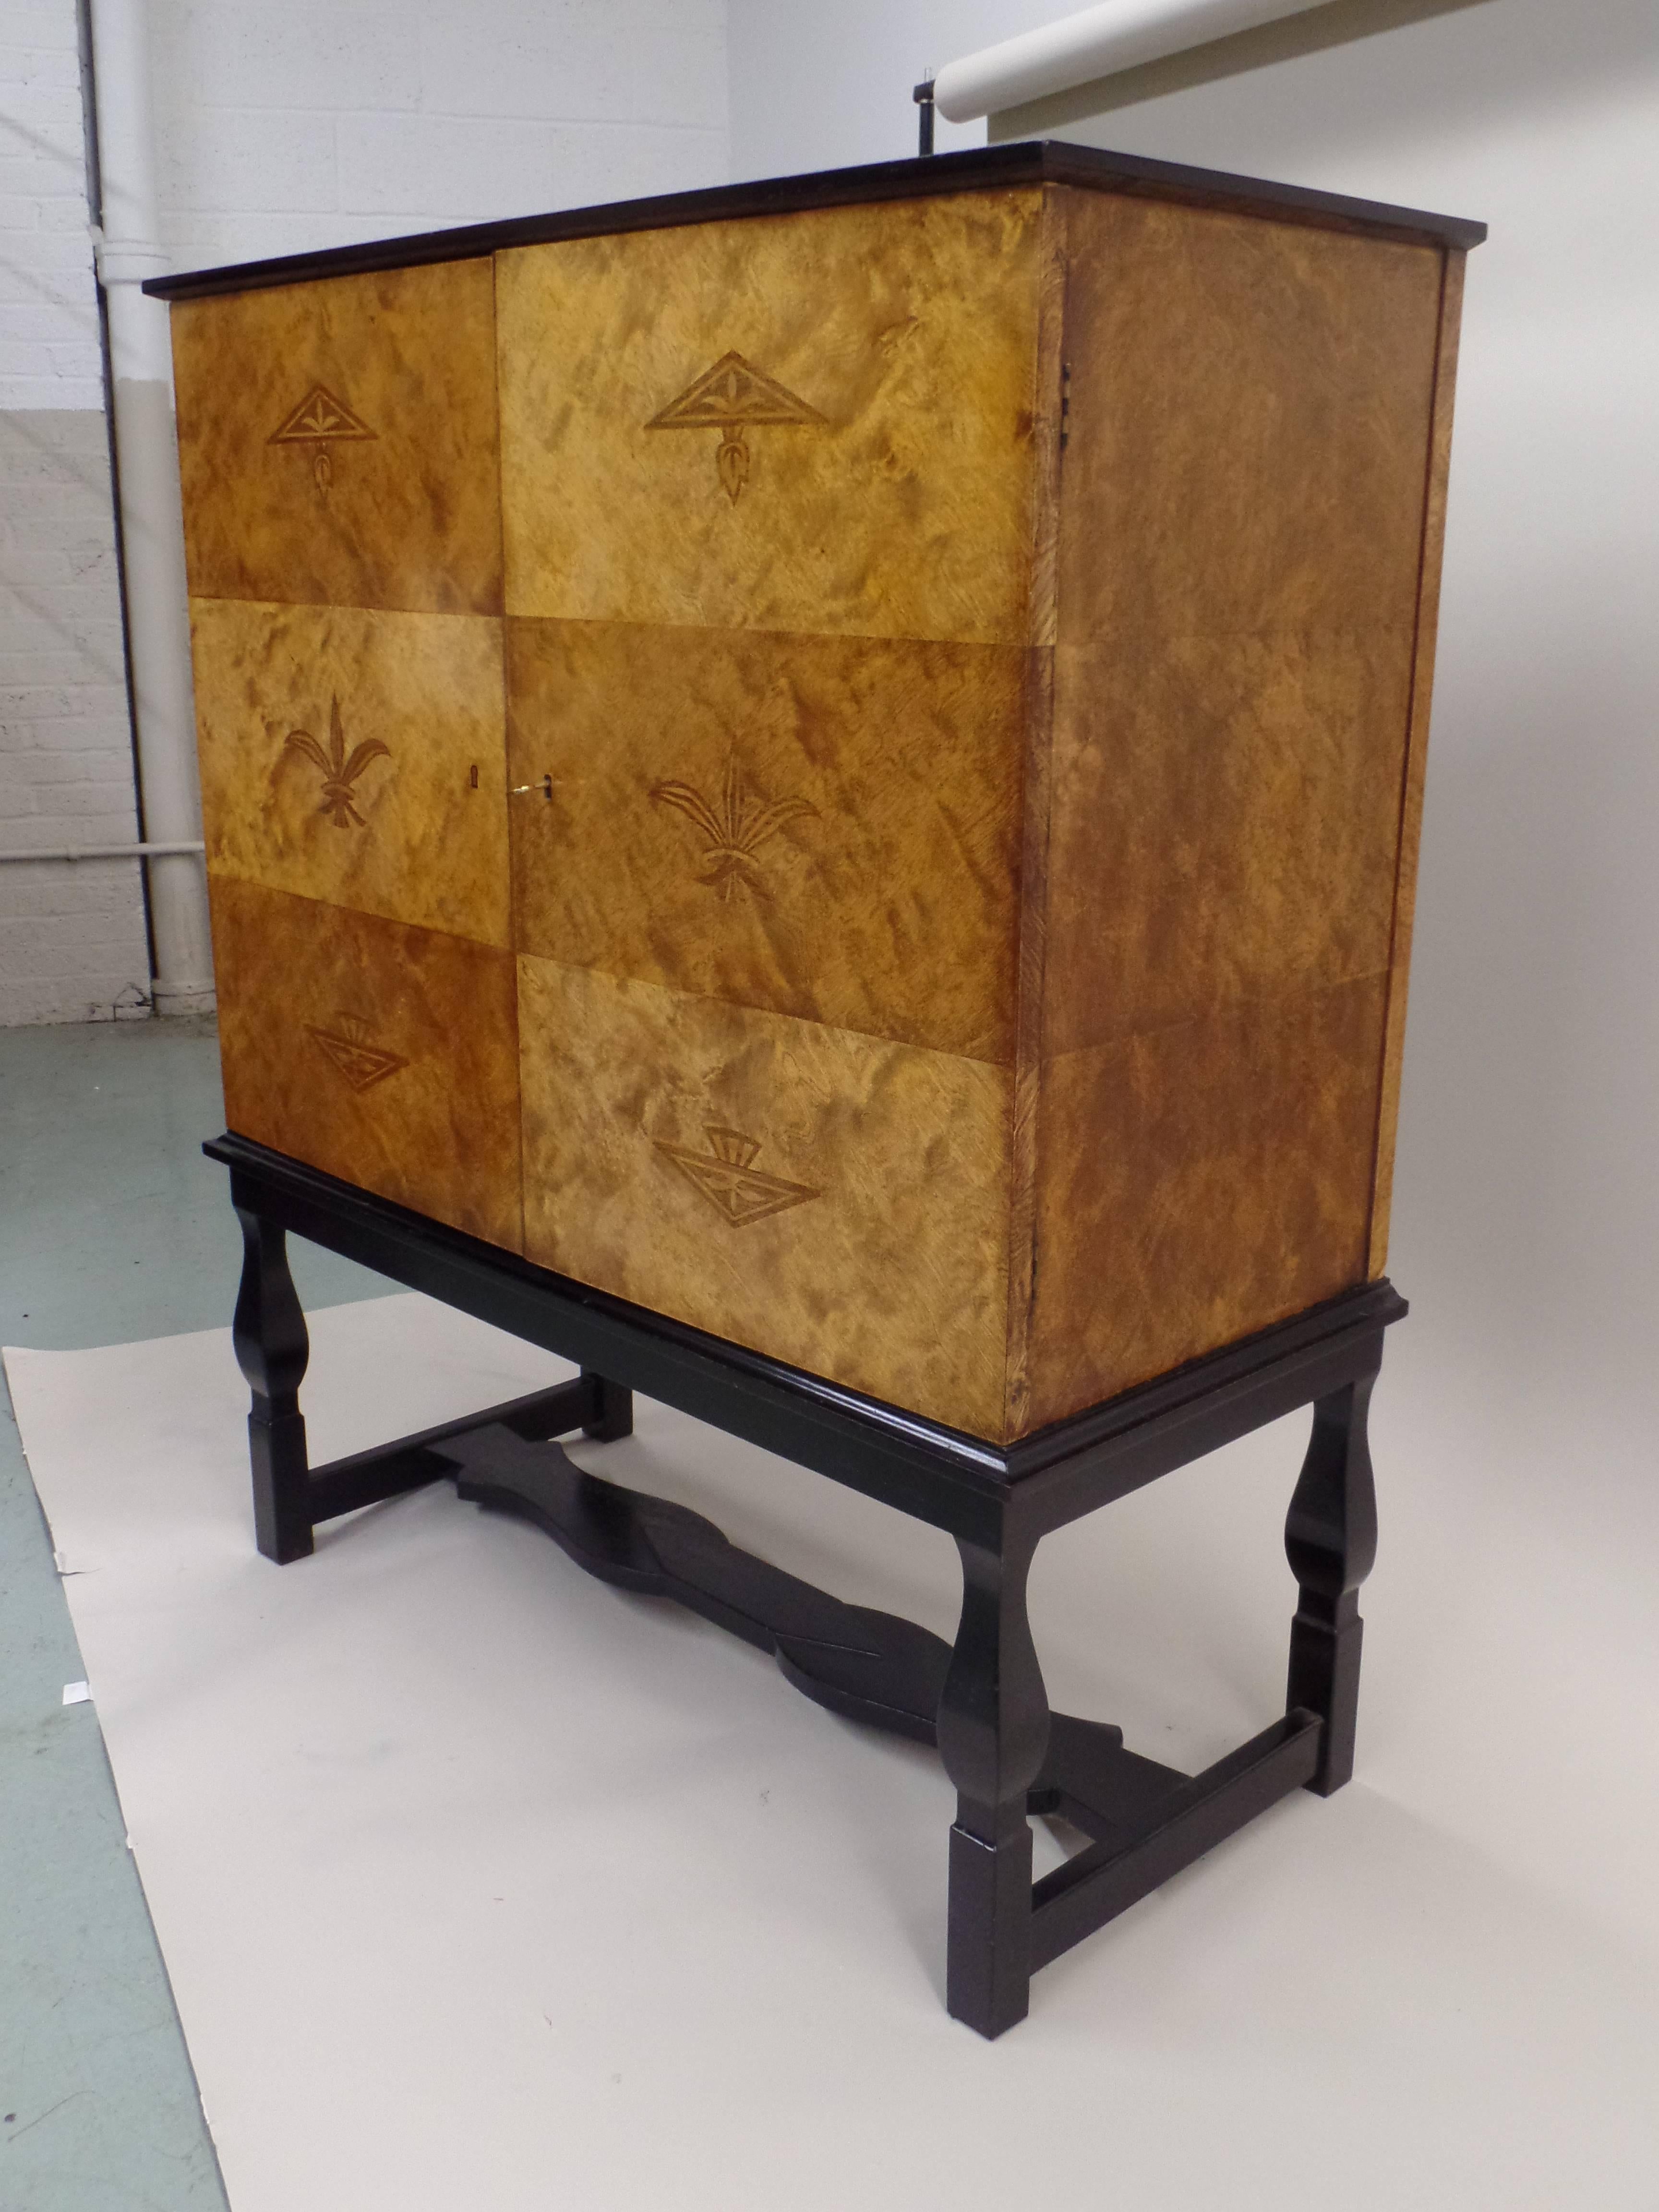 An Important 'Swedish Grace' / Swedish Art Deco / Modern Neoclassical cabinet, sideboard, buffet, bar, storage unit named 'Haga' by Carl Malmsten. The cabinet sits on an ebonized base and it has inlays of geometric decoration and stylized plant